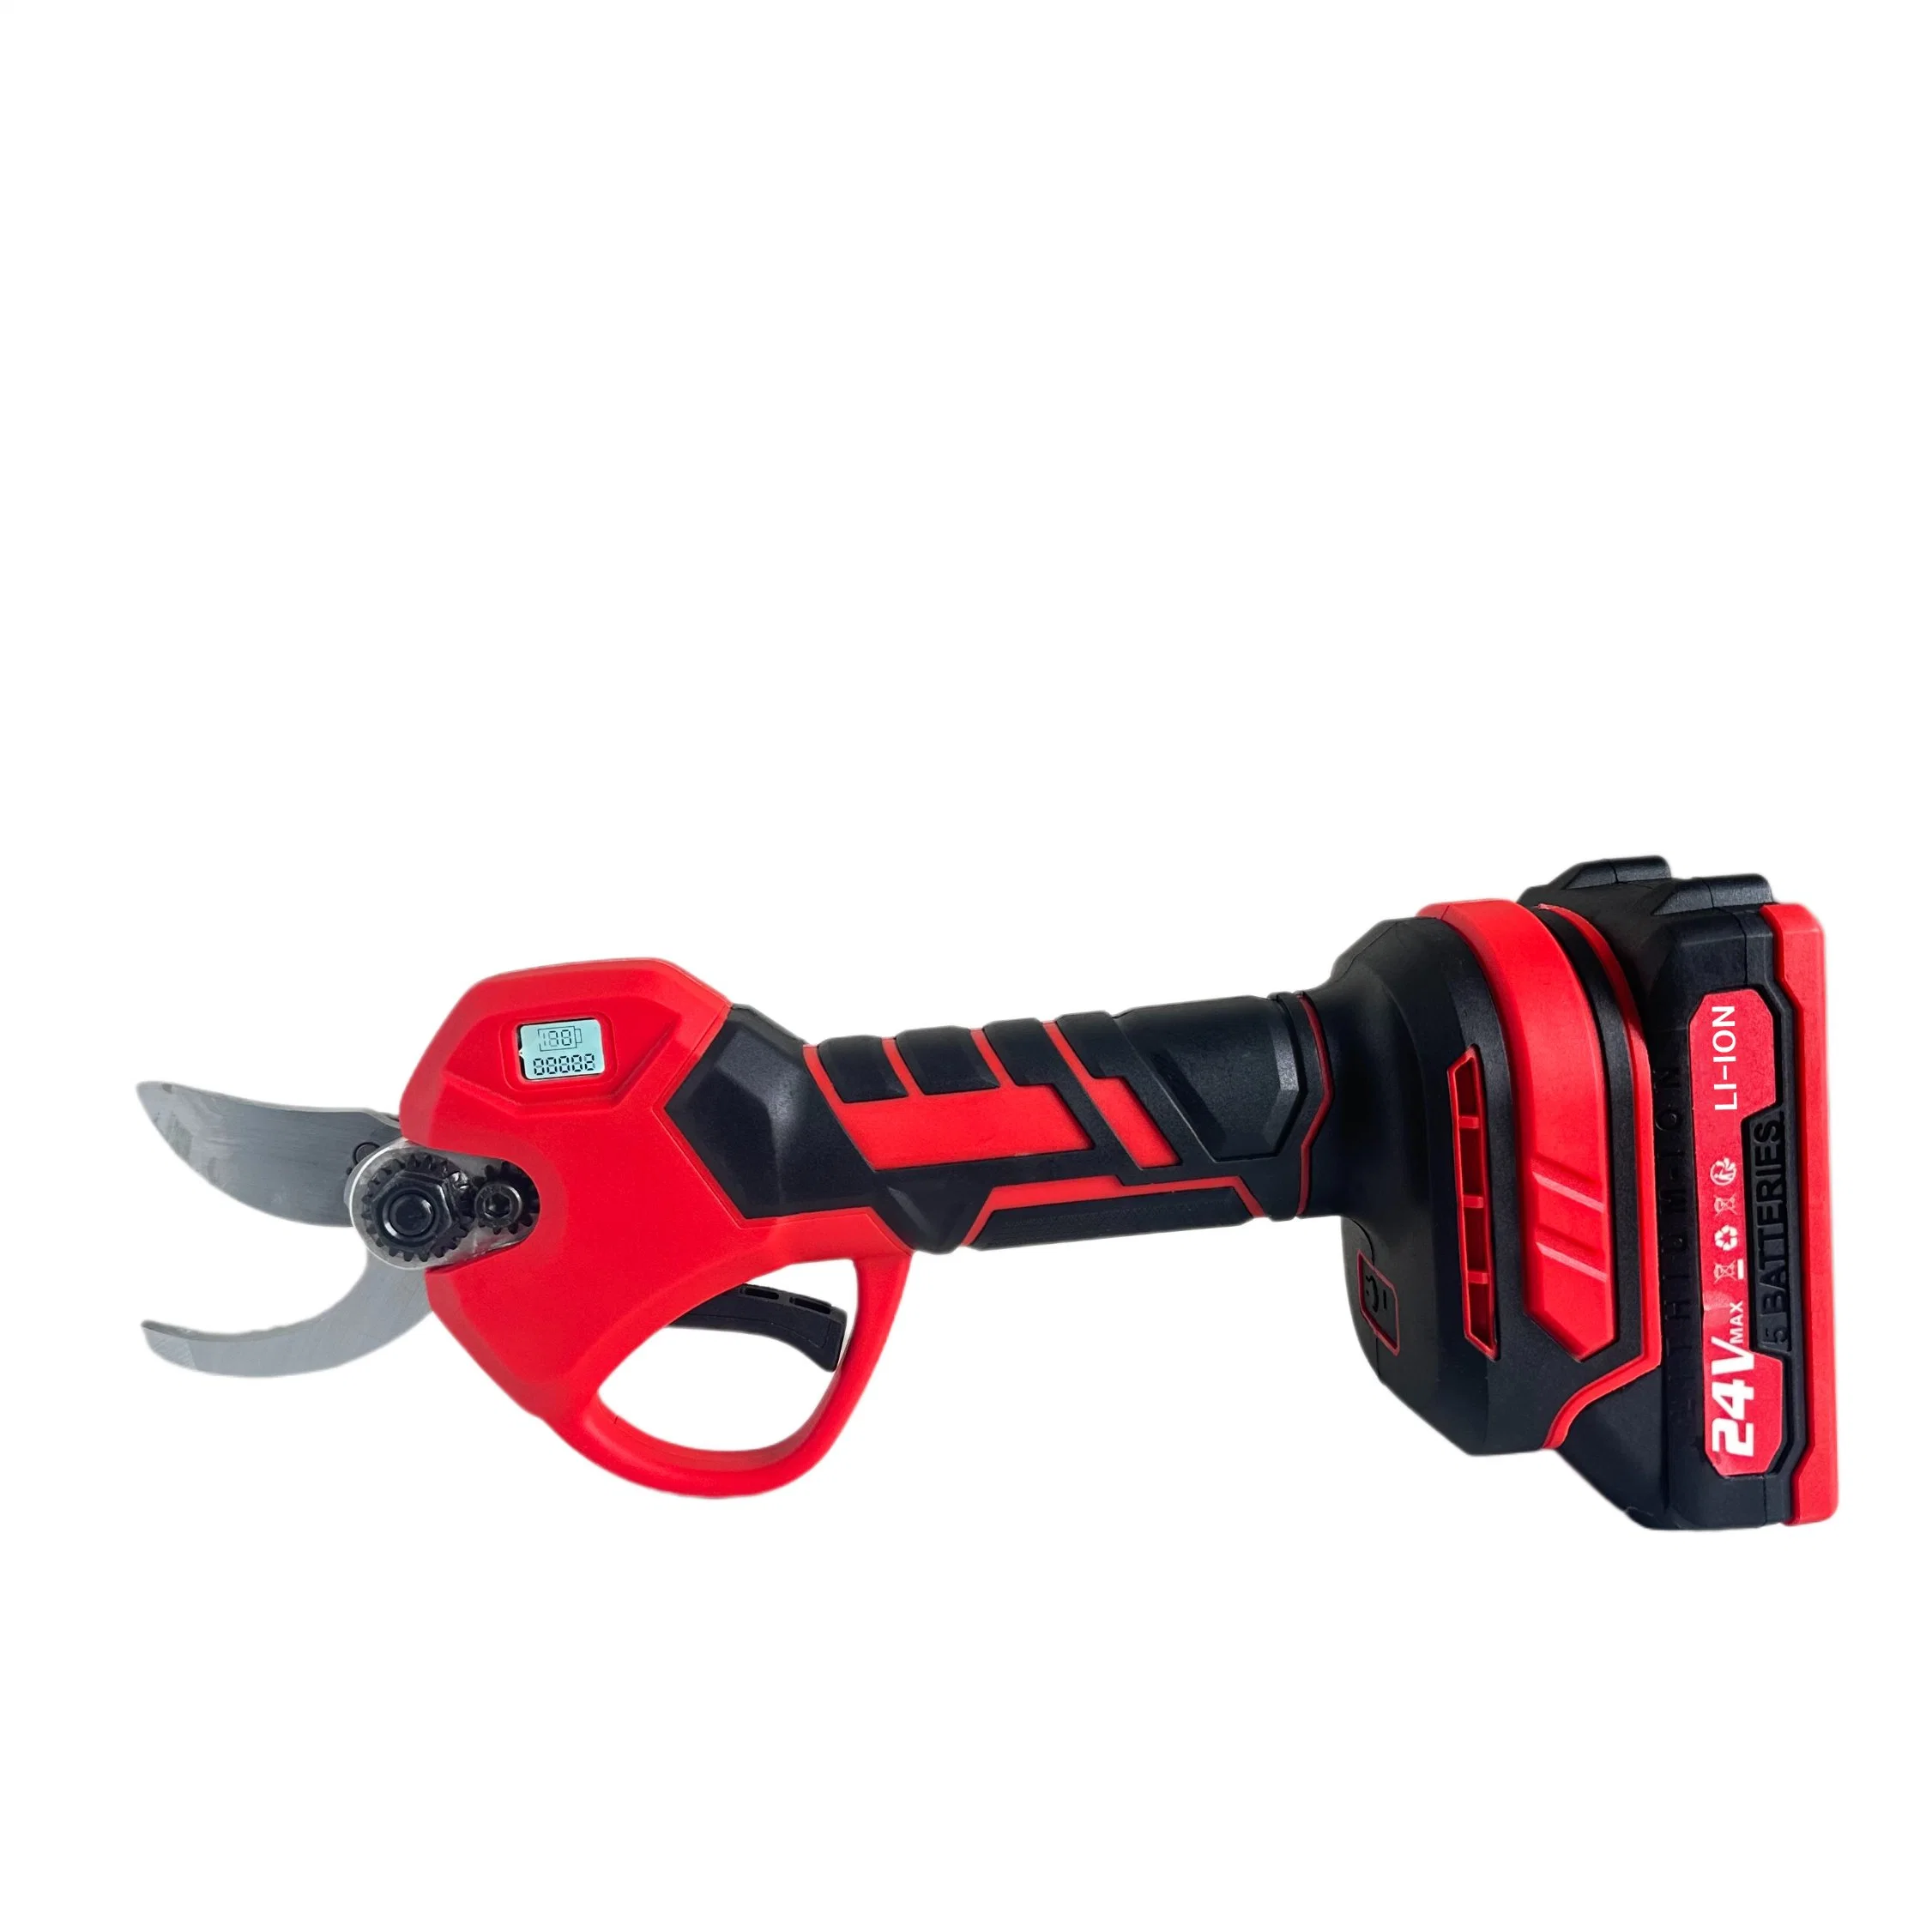 Electric Pruning Shears Recharge Scissors with a Digital Display